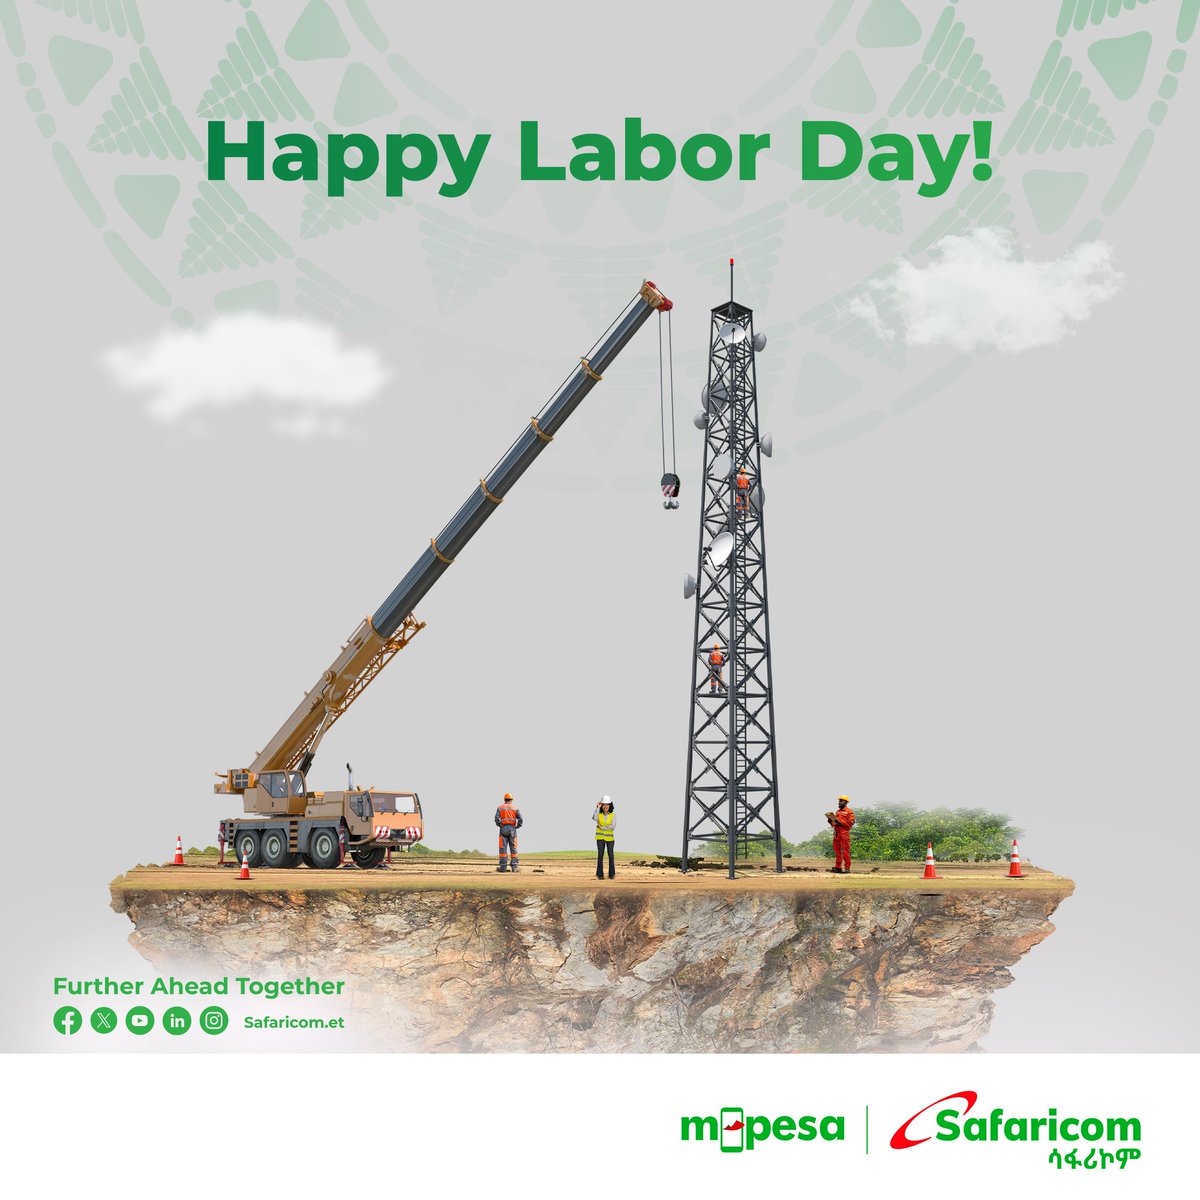 To our dear customers, to the families of Safaricom Ethiopia who are serving our beloved customers, and to all the hardworking workers who are engaged in different fields of work, we extend our heartfelt appreciation! Happy Labor Day! #SafaricomEthiopia #FurtherAheadTogether